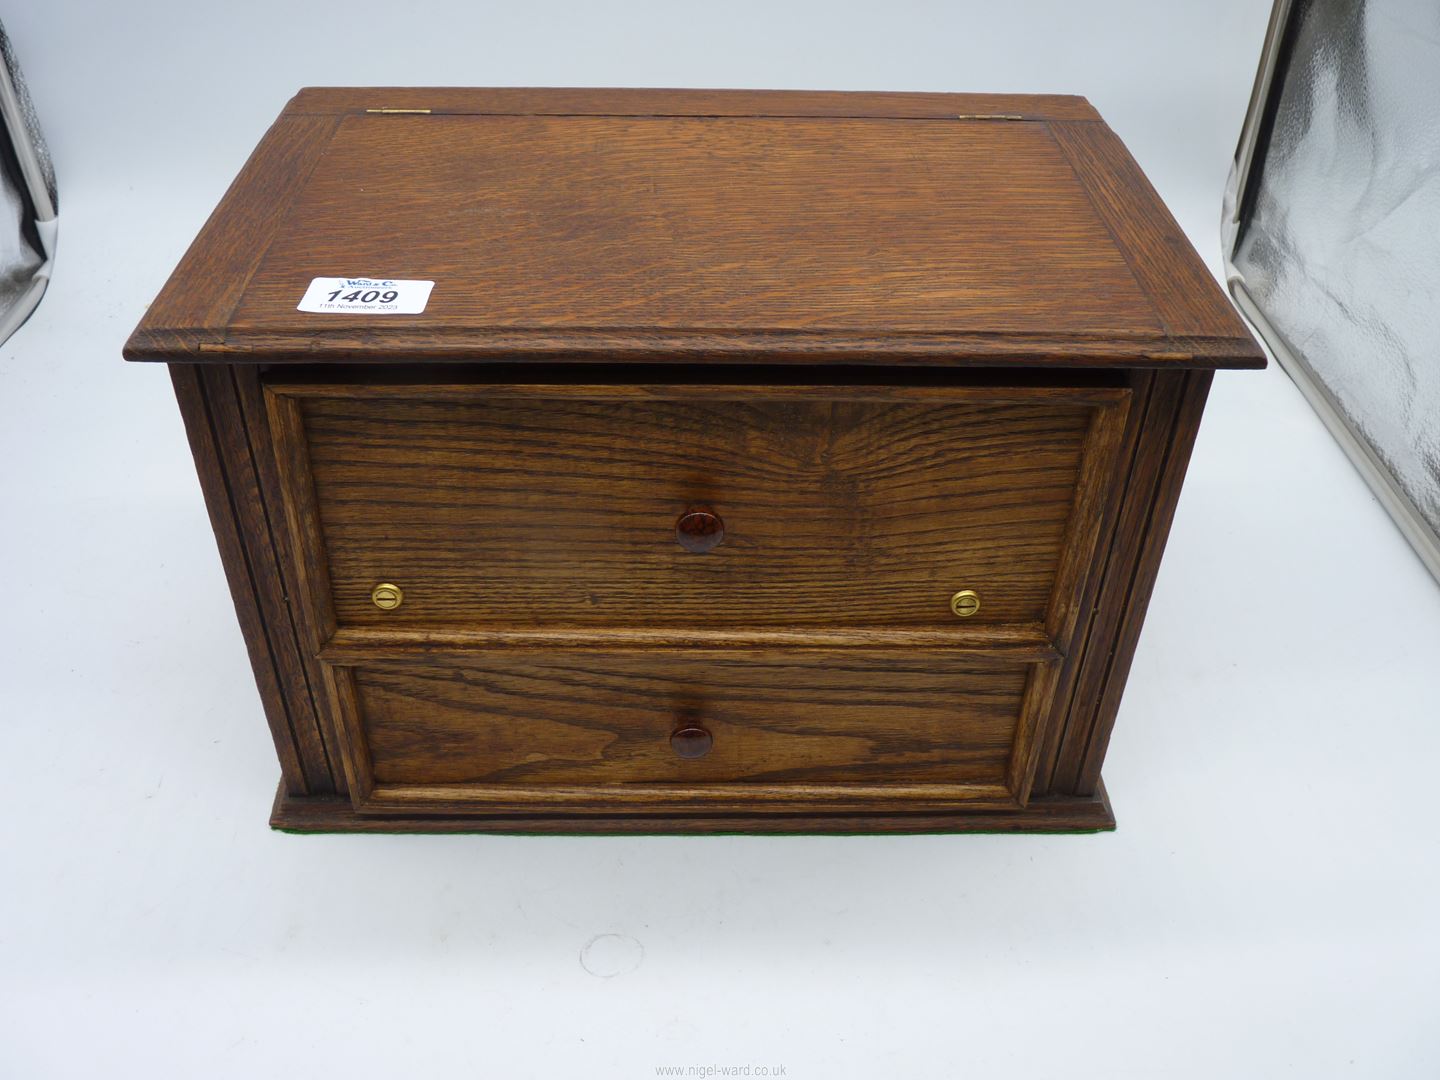 An Oak Box with lift-up lid and lower drawer, 13 1/2'' x 8 1/4'' x 9'' high.